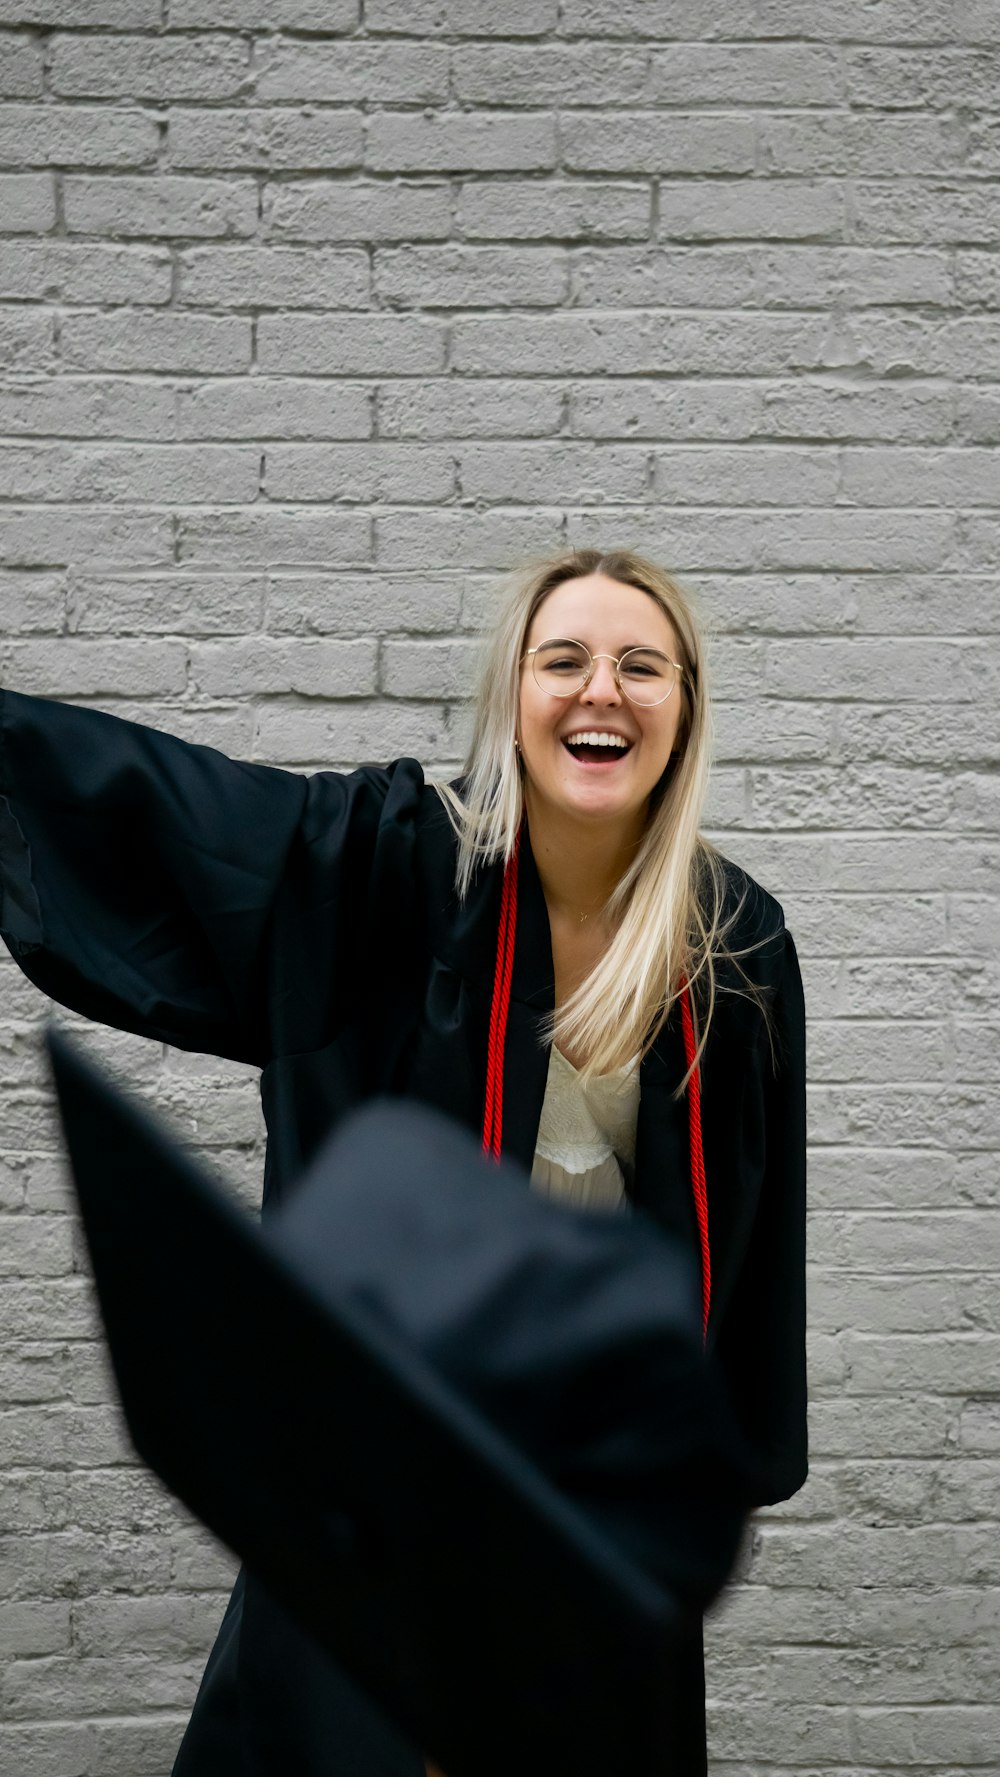 woman in black academic gown smiling